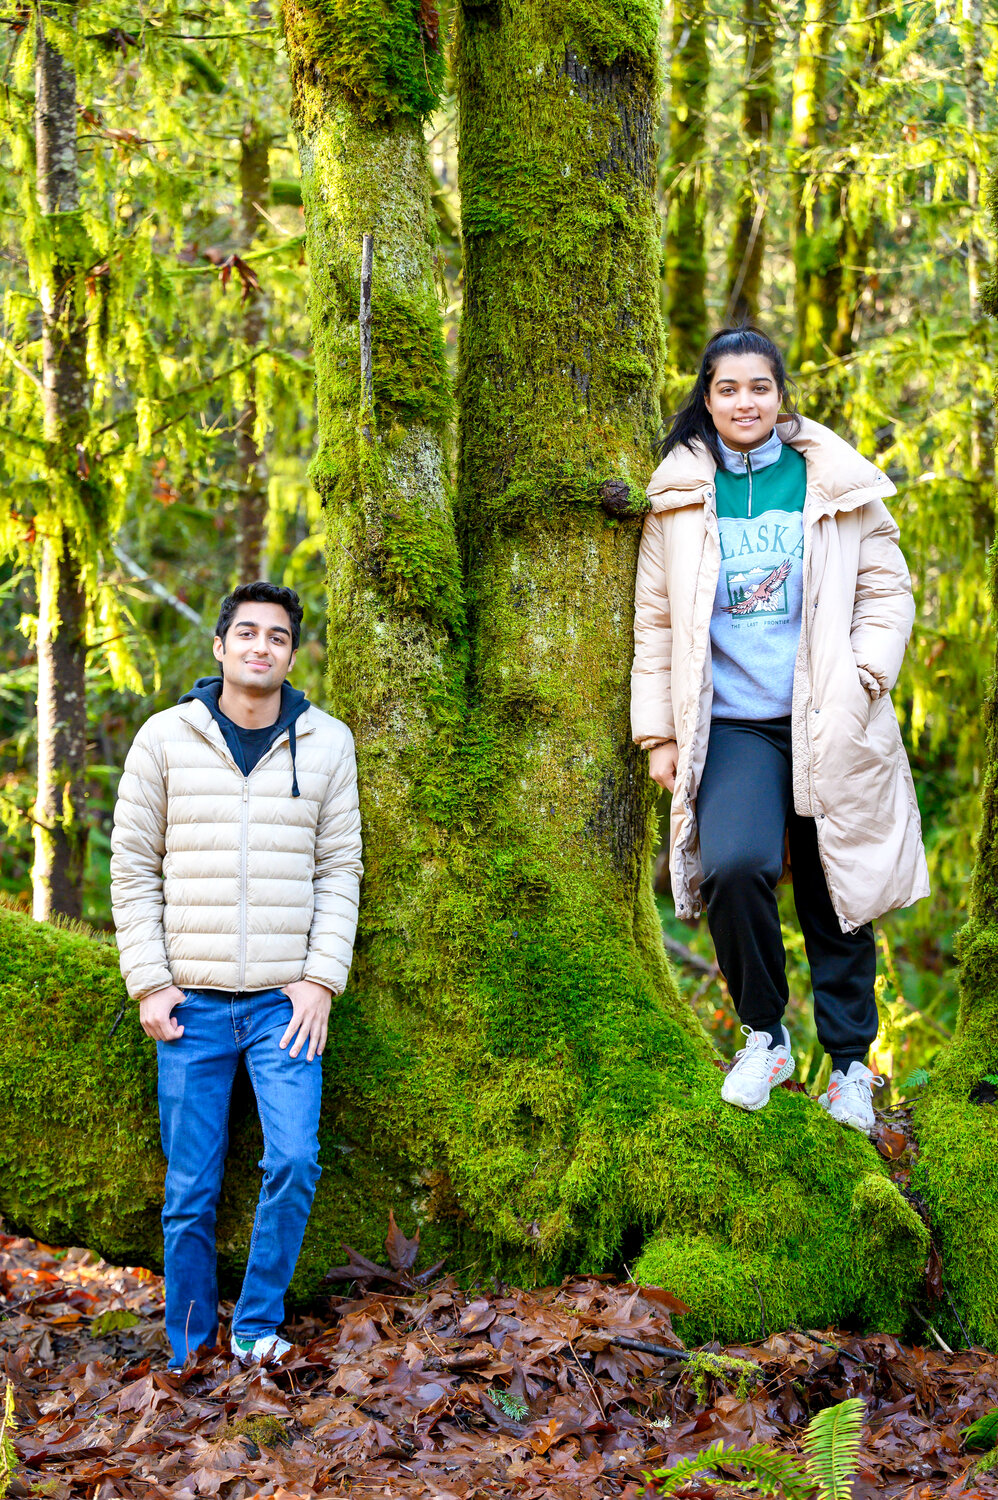 Siblings Kunal and Karishma Sharma have dreams to bring a new wave of tourism that showcases forest farming management and helps support the local economy.